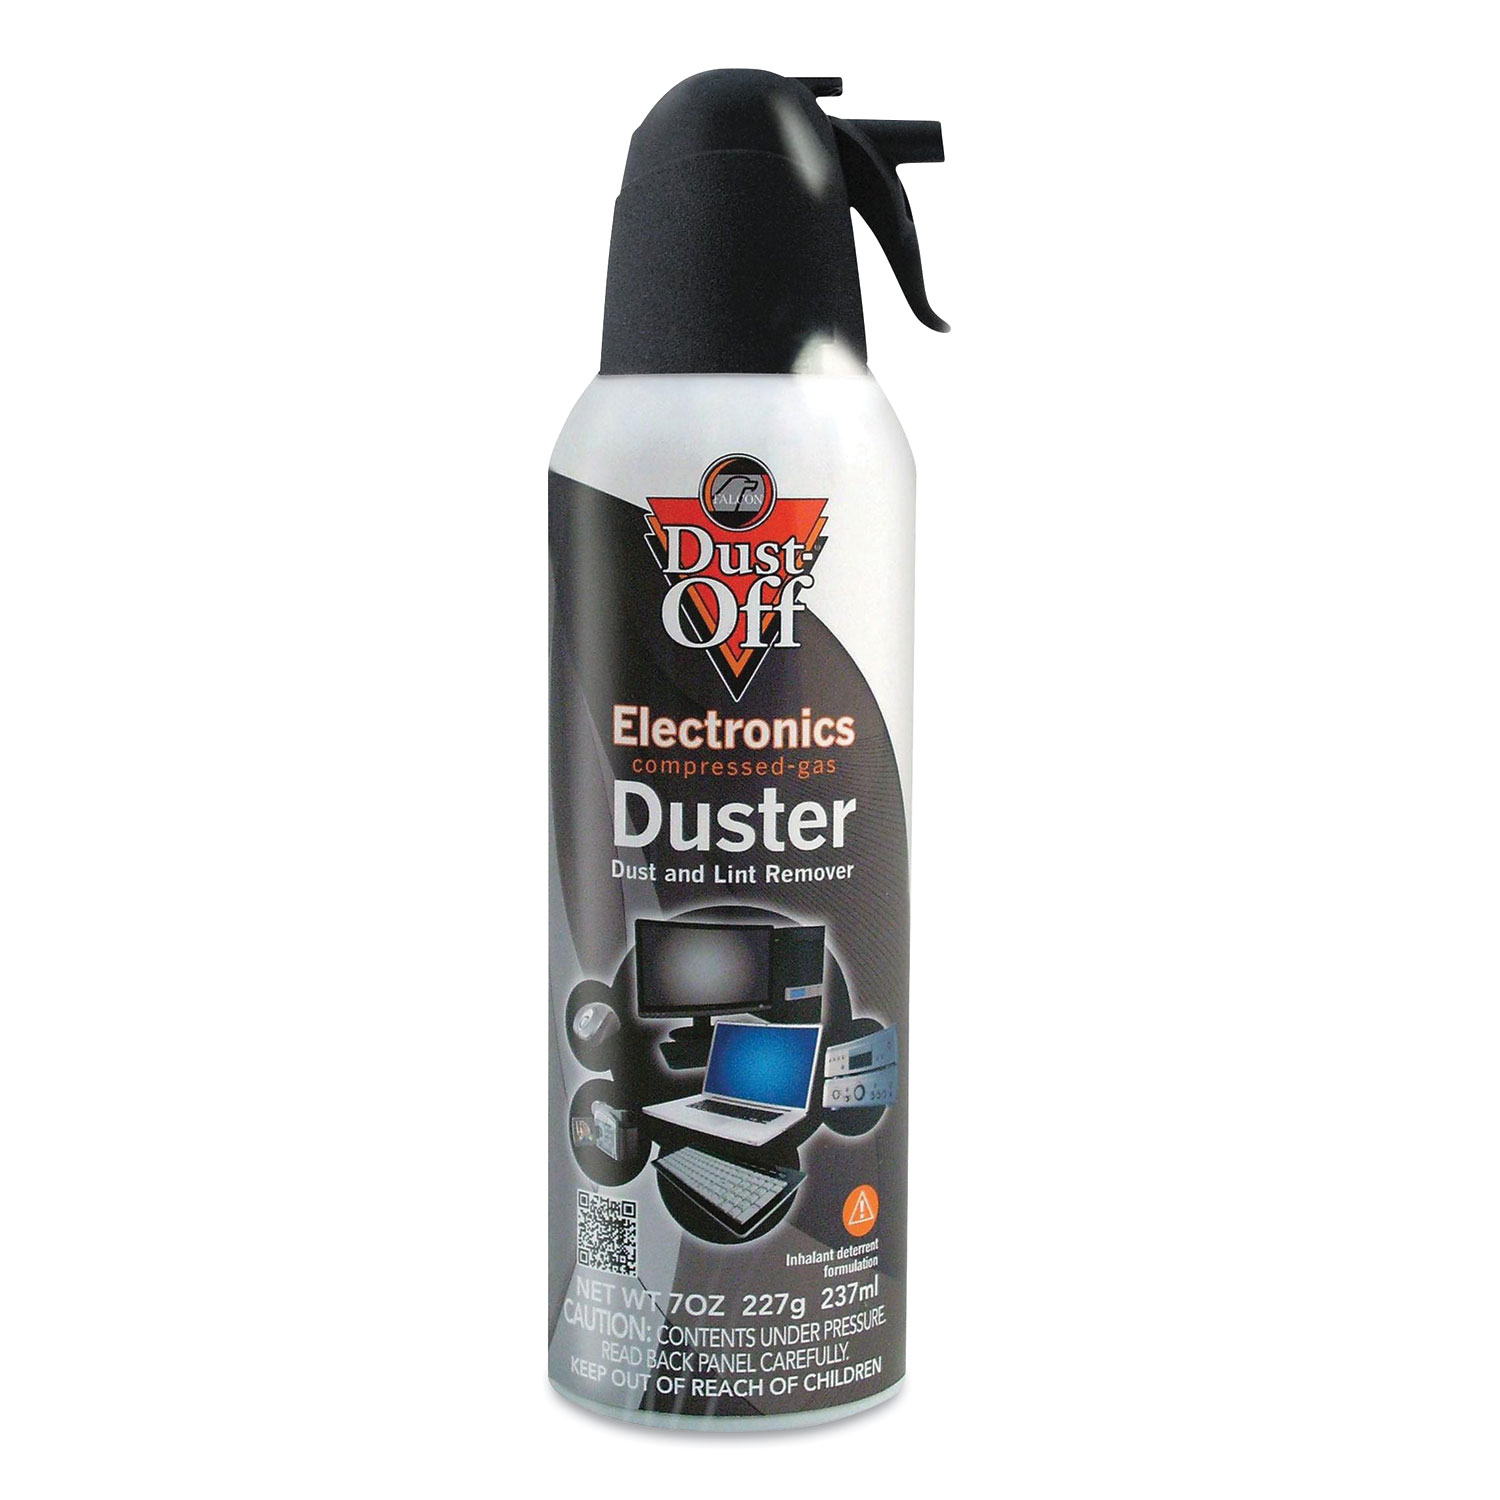  Dust-Off DPSM Disposable Compressed Gas Duster, 7 oz Can (DOF365998) 